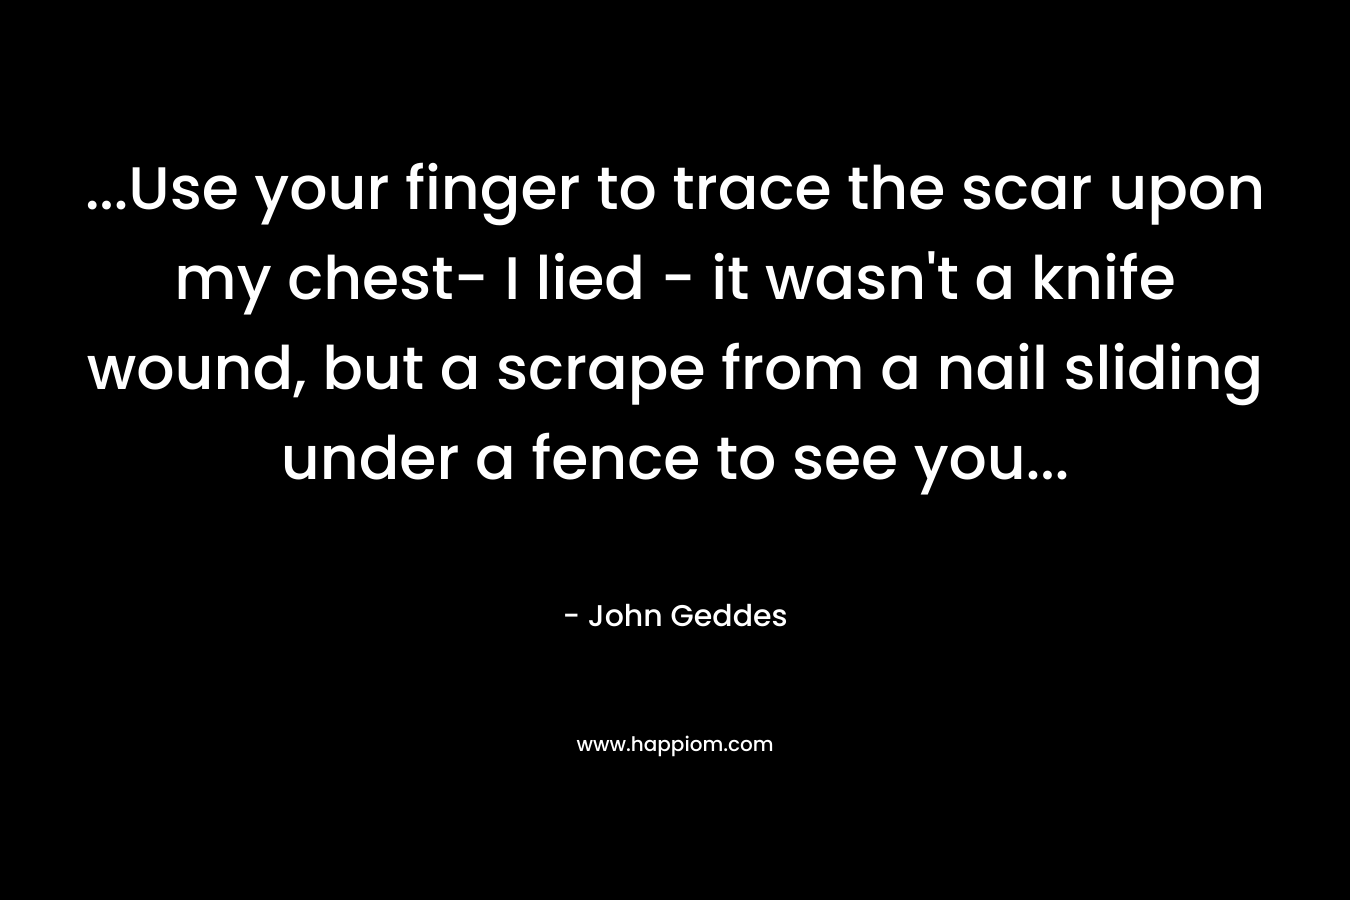 ...Use your finger to trace the scar upon my chest- I lied - it wasn't a knife wound, but a scrape from a nail sliding under a fence to see you...